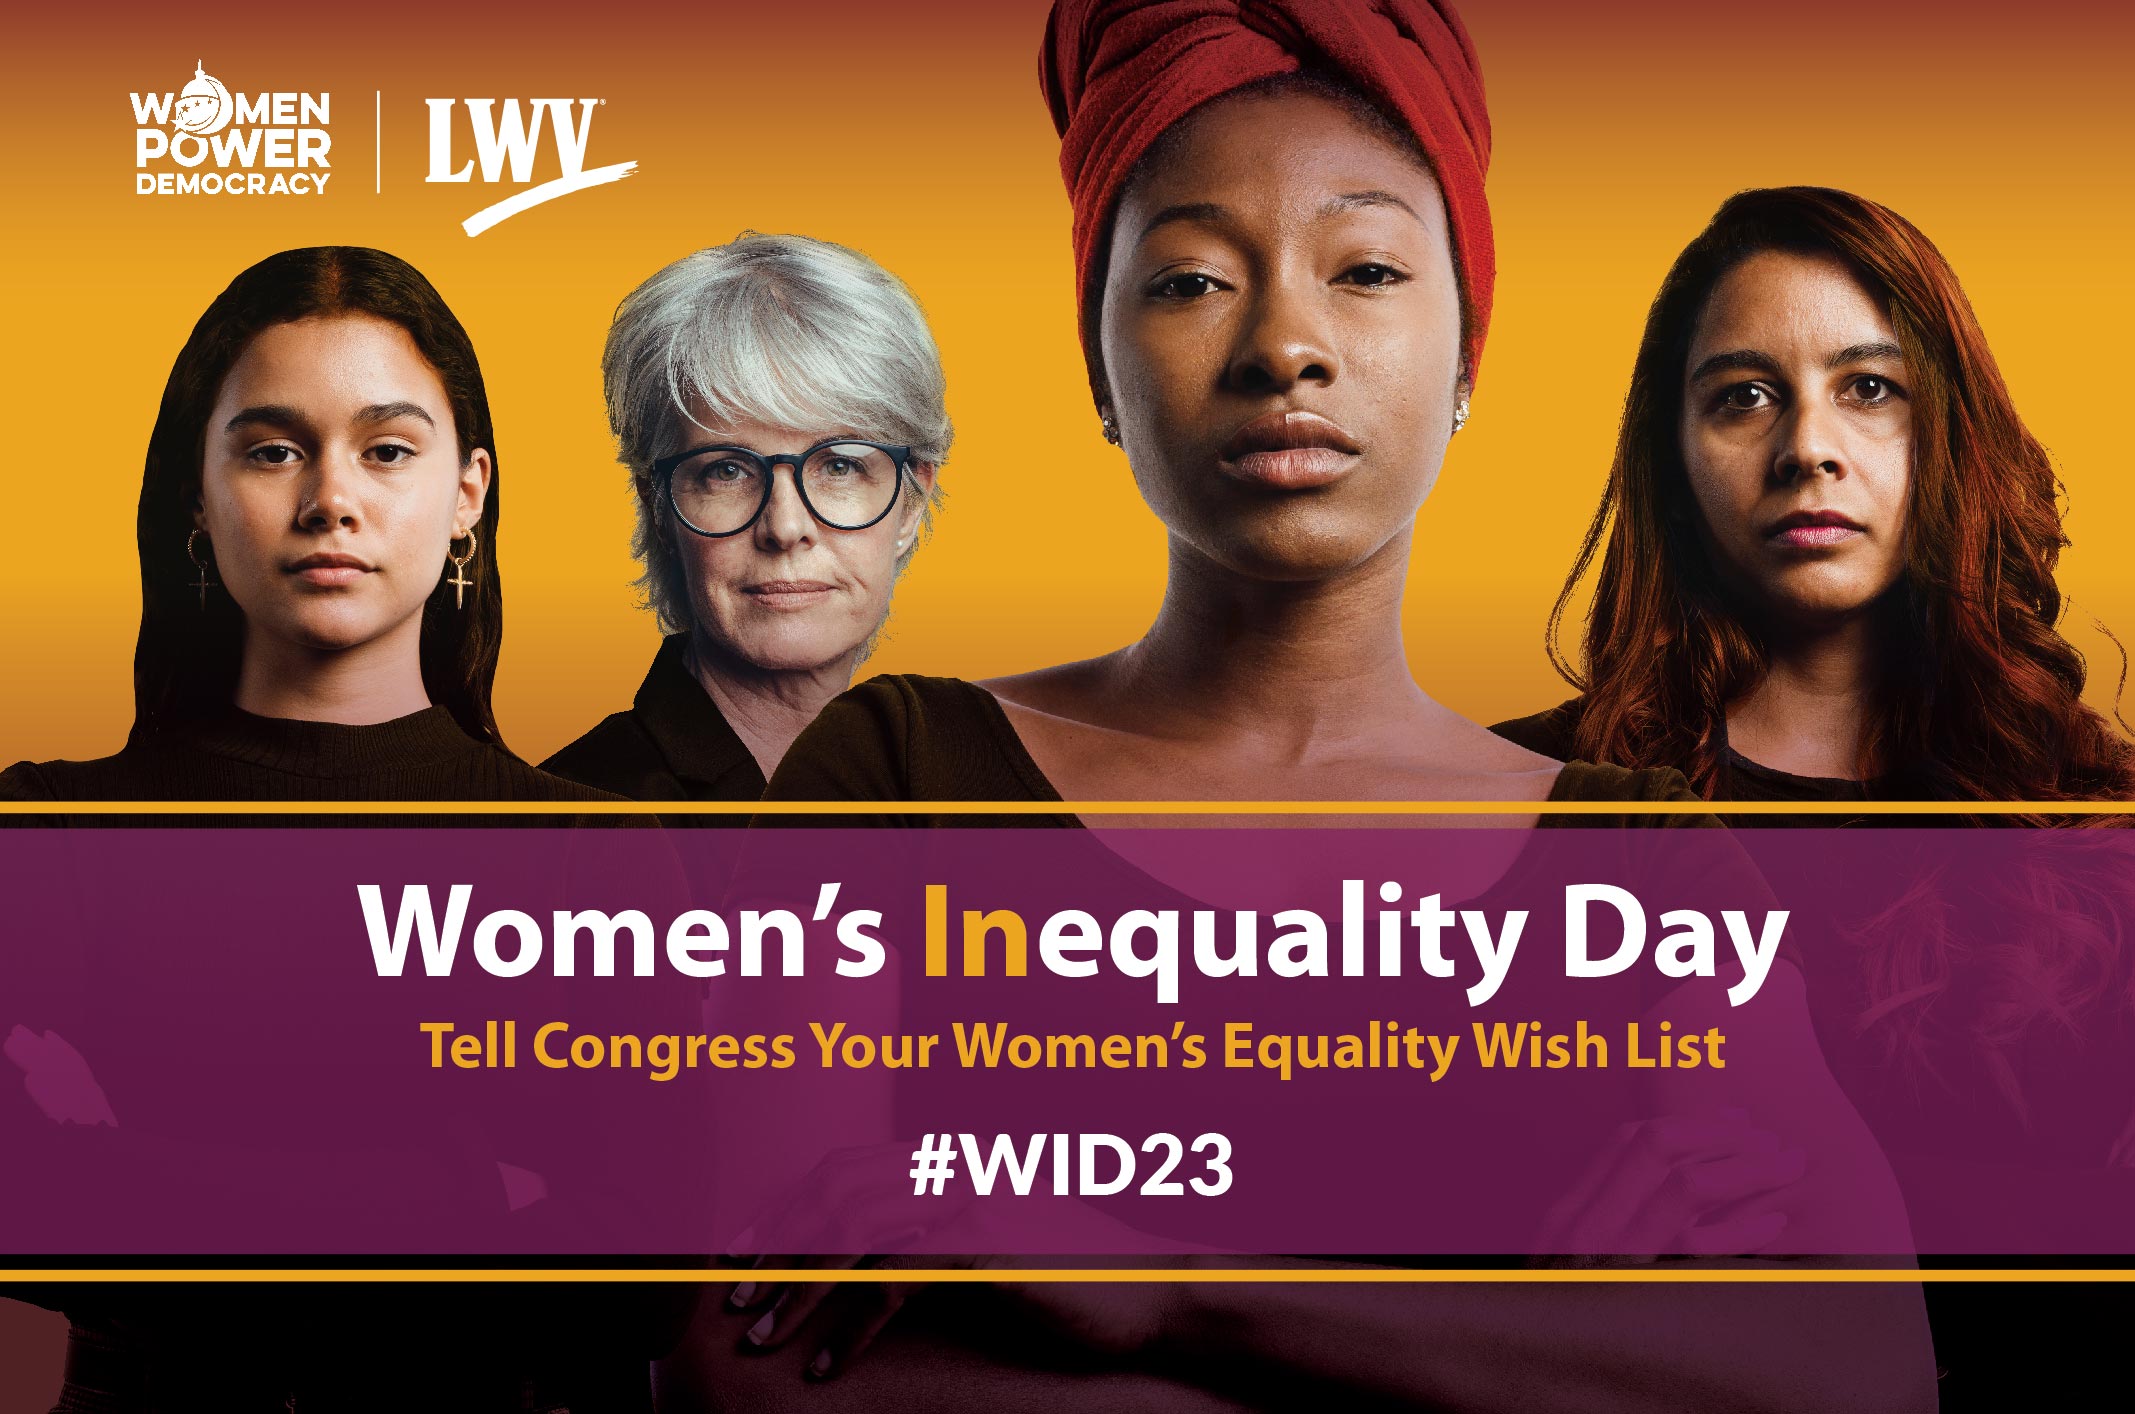 Four women standing in front of an orange gradient background. There is a purple translucent box at the bottom that says: "Women's Inequality Day: Tell Congress Your Women's Equality Wish List: #WID23"